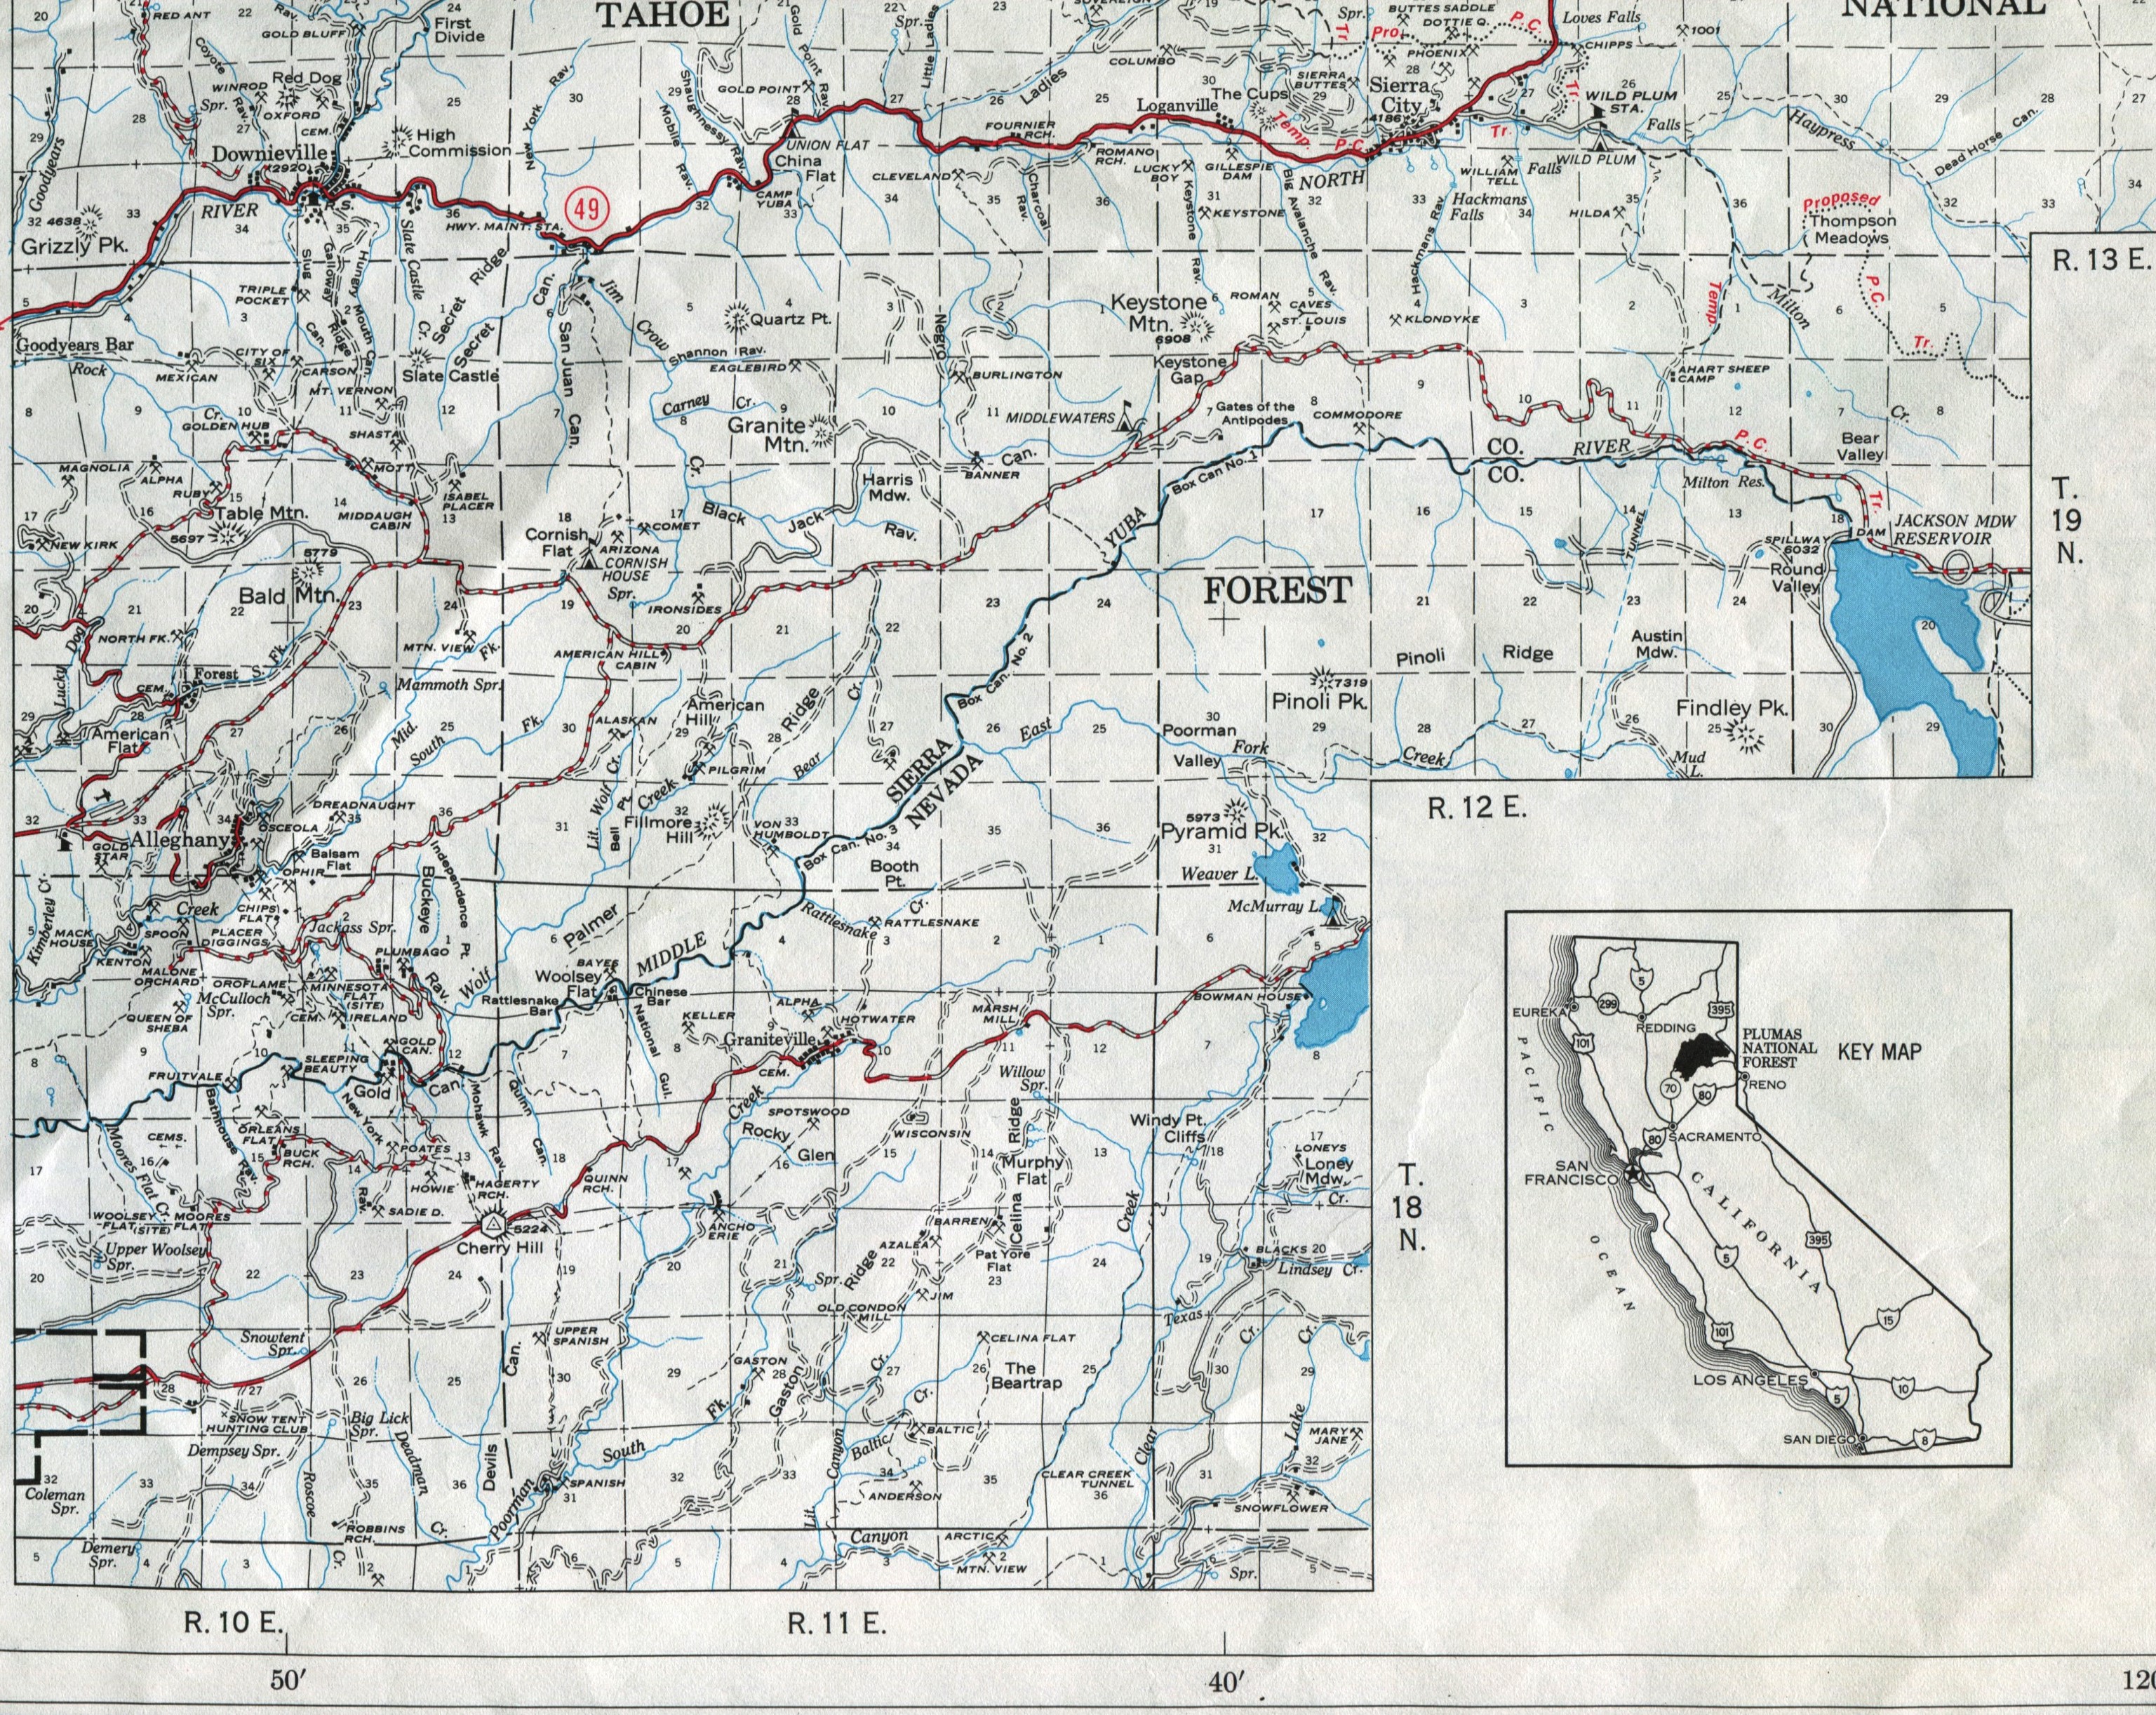 Plumas National Forest Map 1971